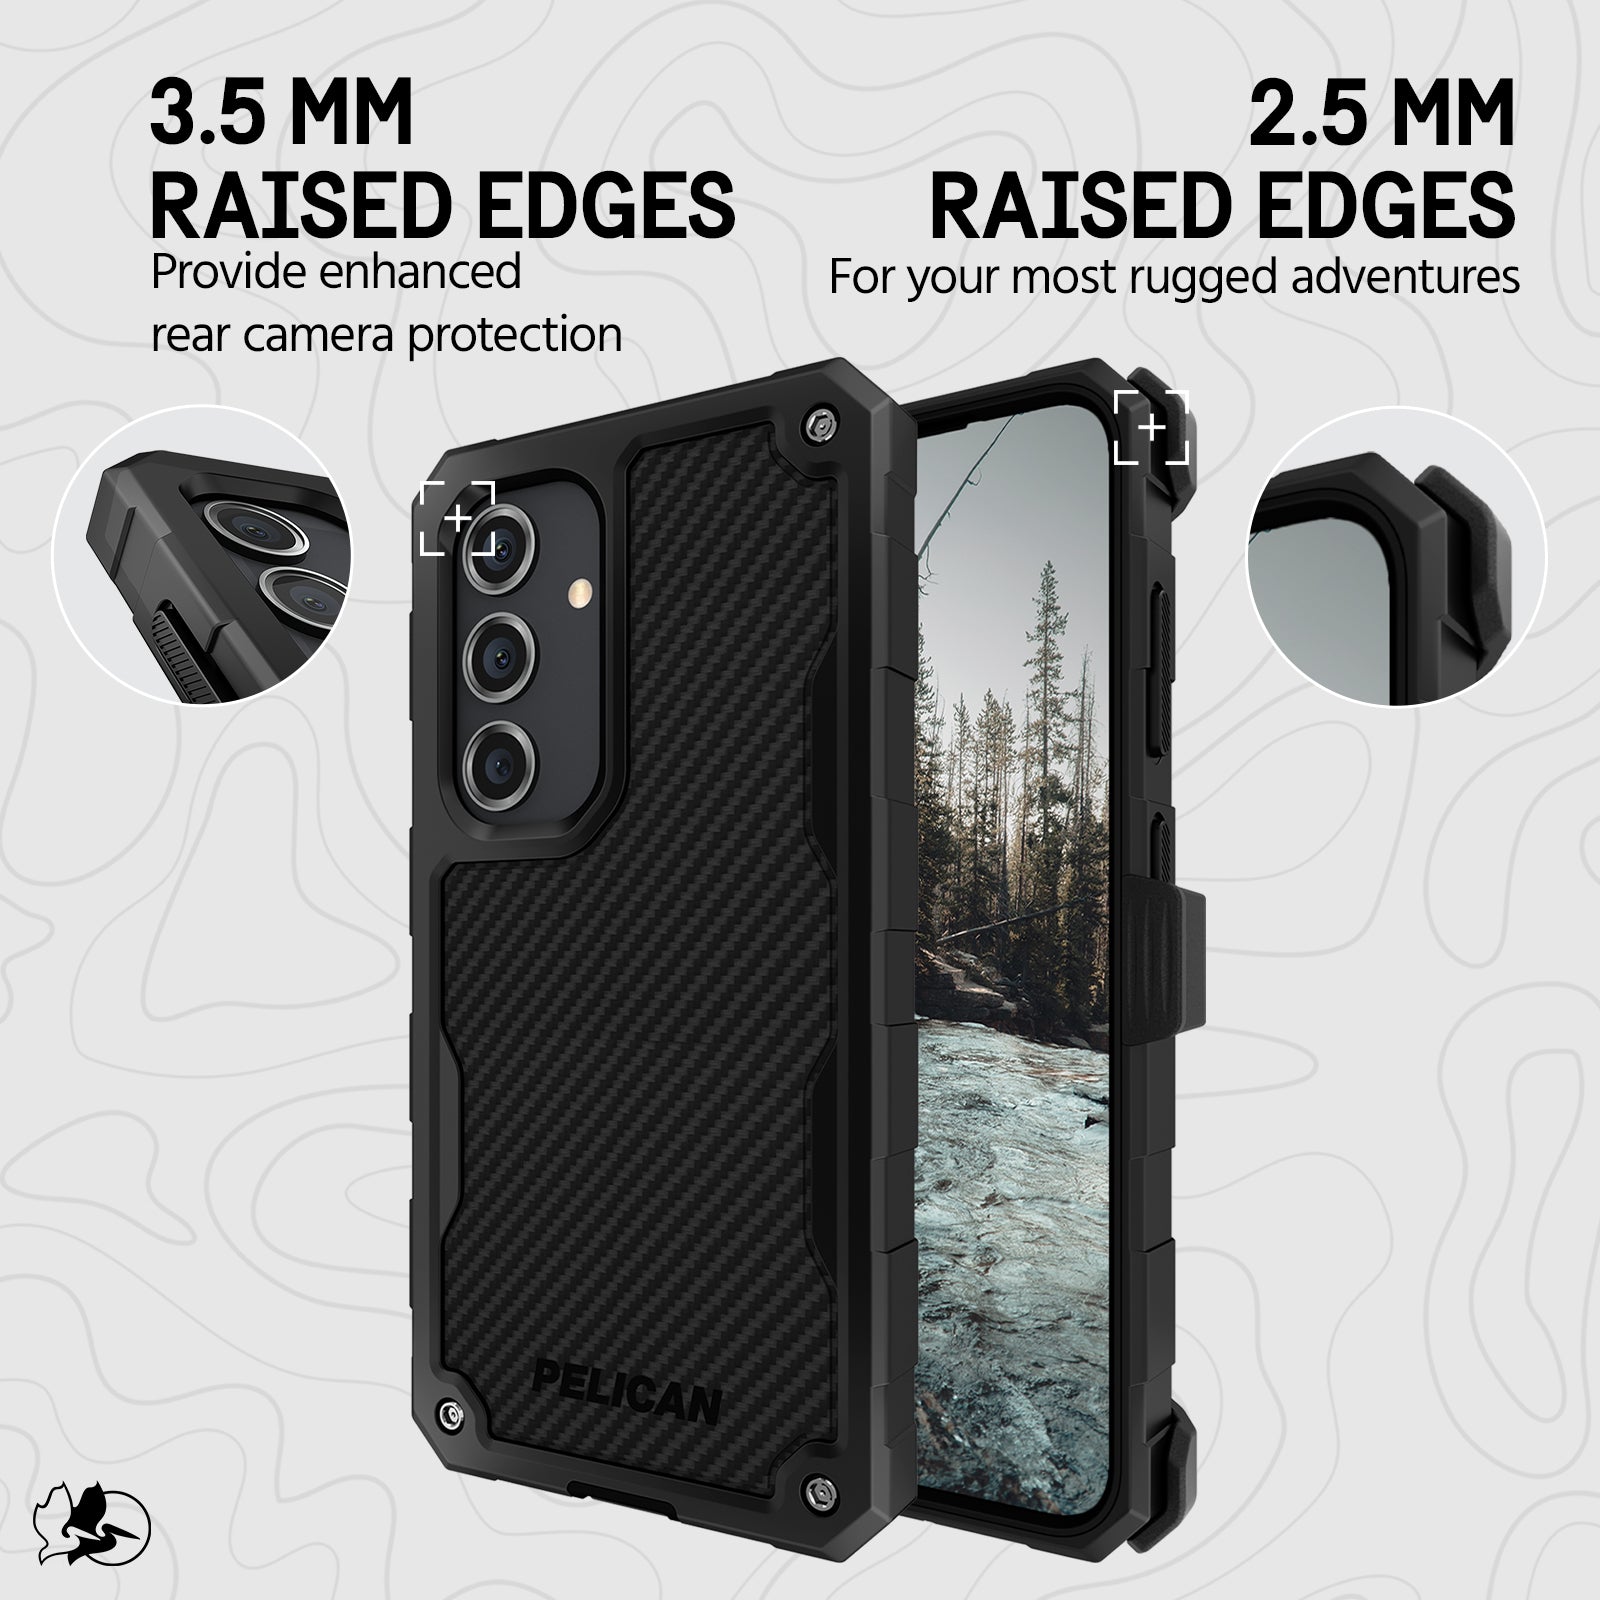 3.5MM RAISED EDGES PROVIDE ENHANCED REAR CAMERA PROTECTION. 2.5MM RAISED EDGES FOR YOUR MOST RUGGES ADVENTURES